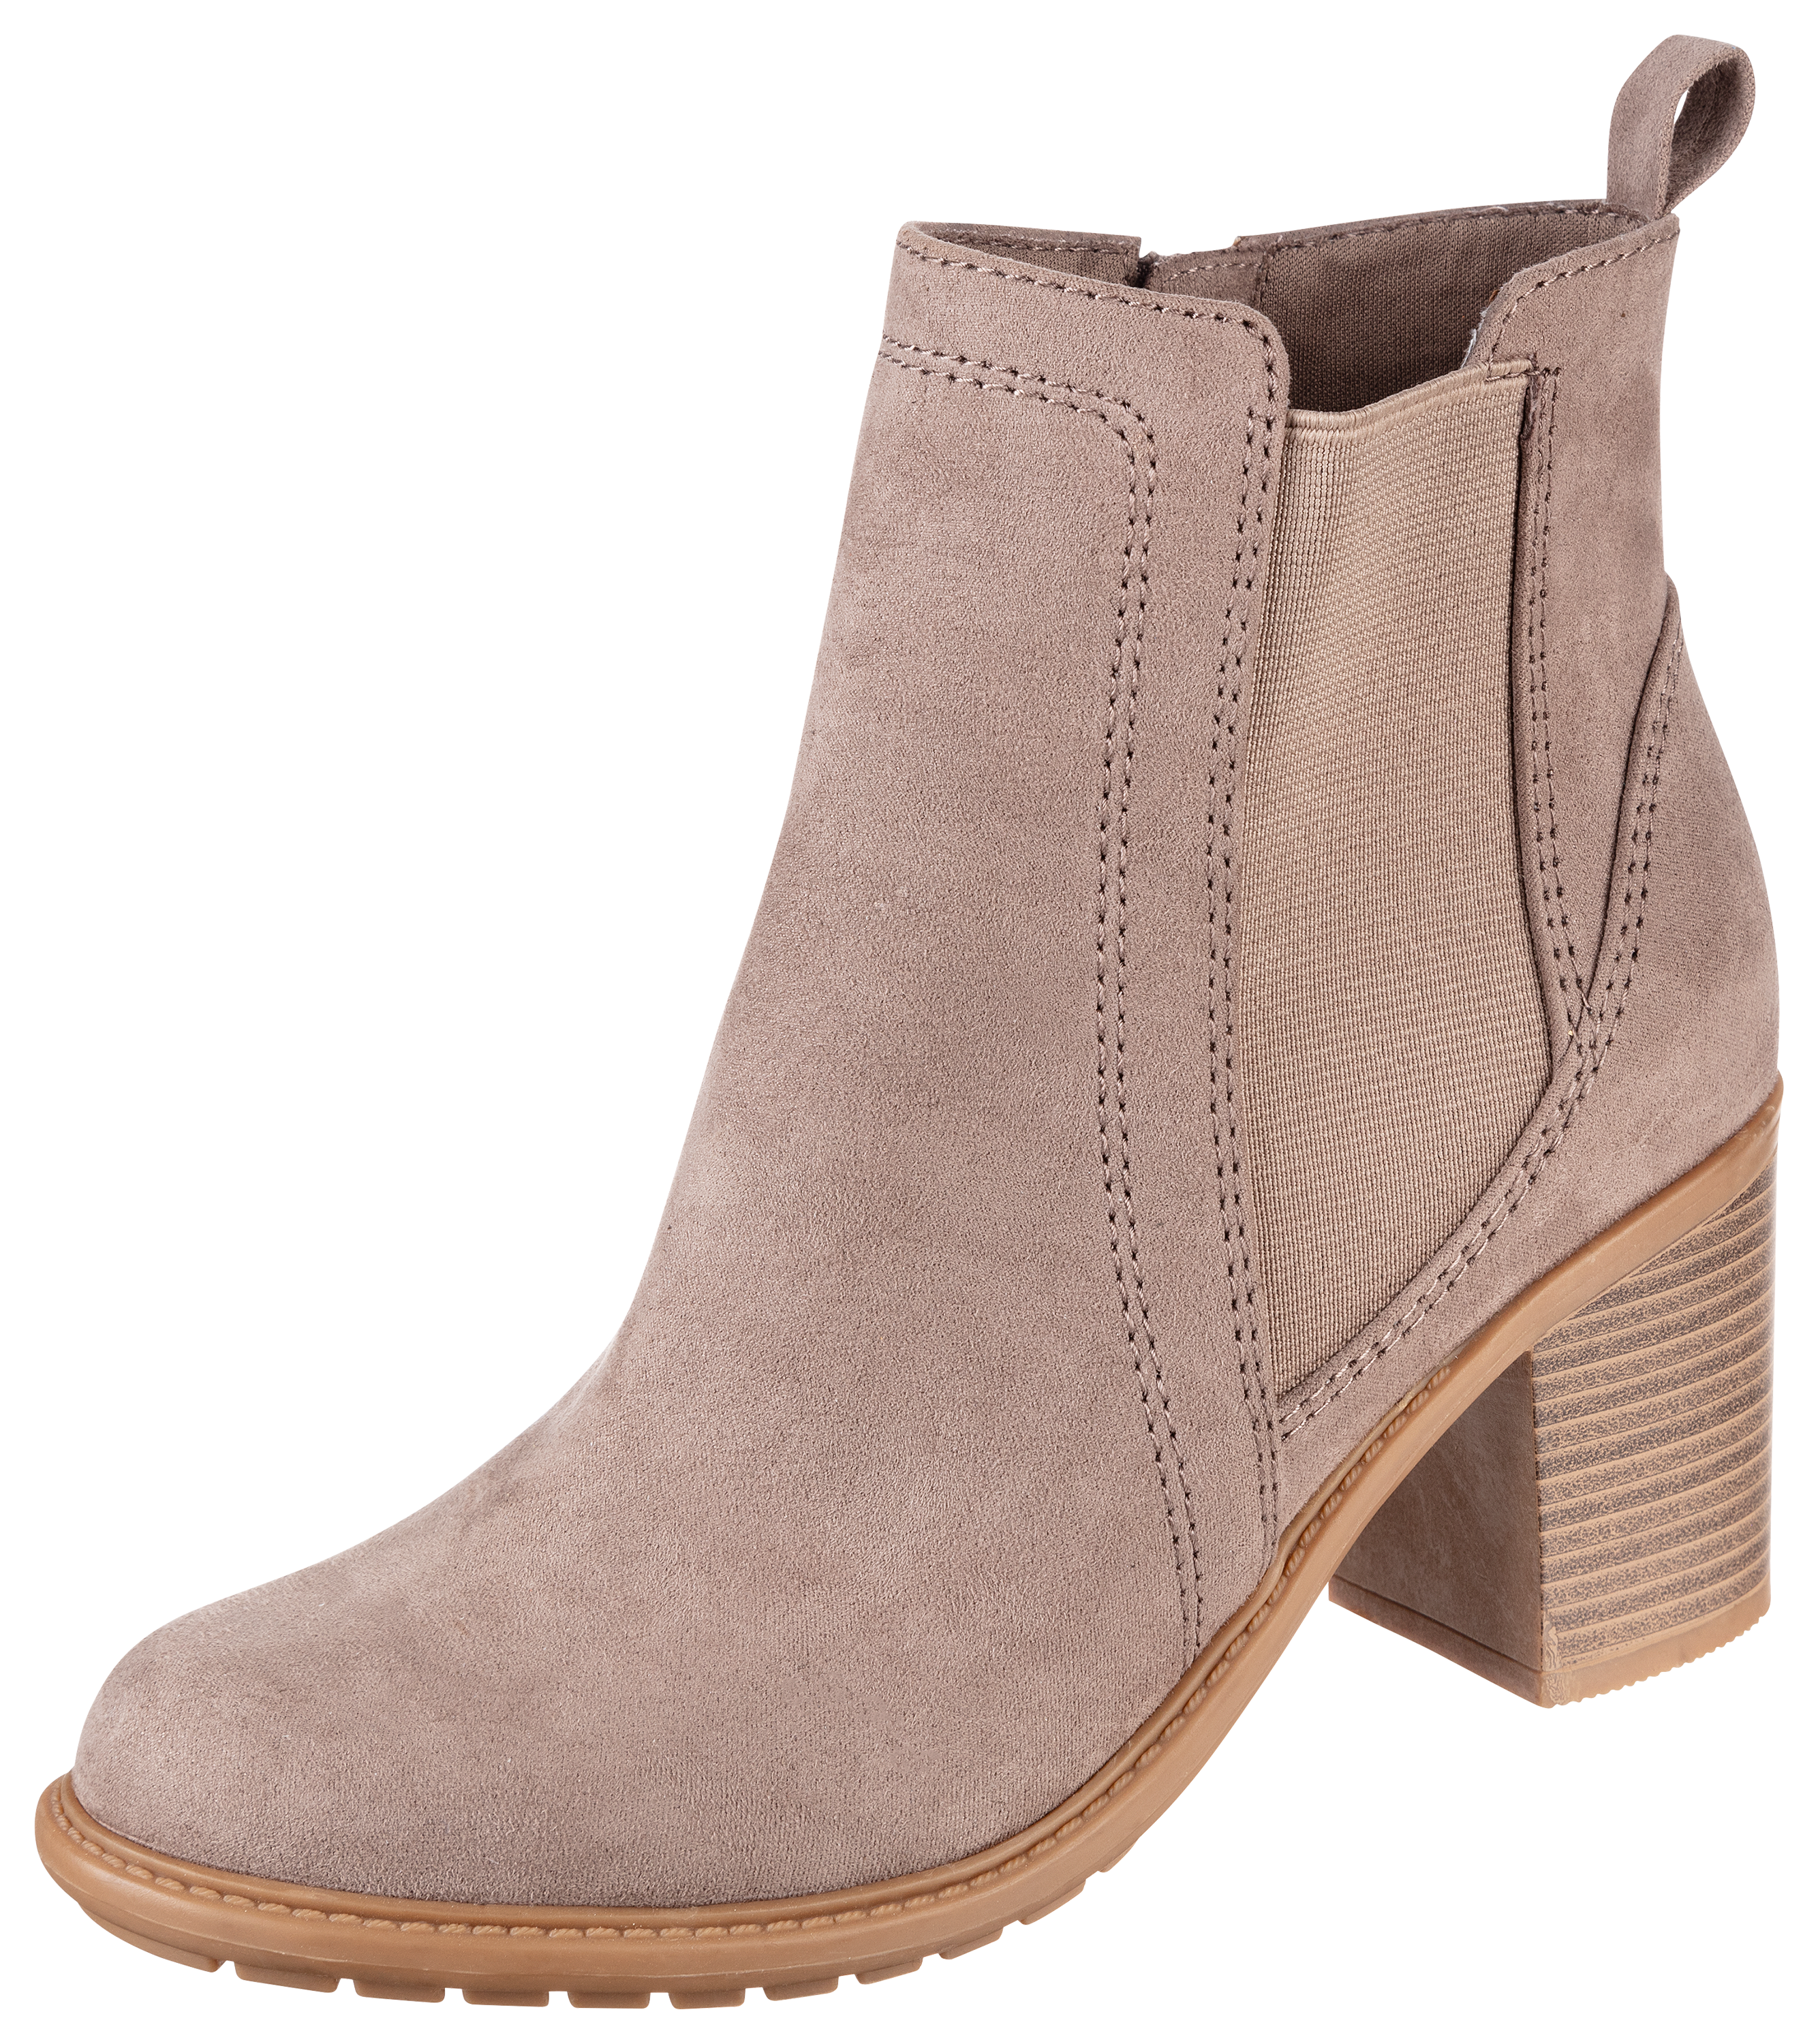 Natural Reflections Natalie II Boots for Ladies - Taupe - 8M